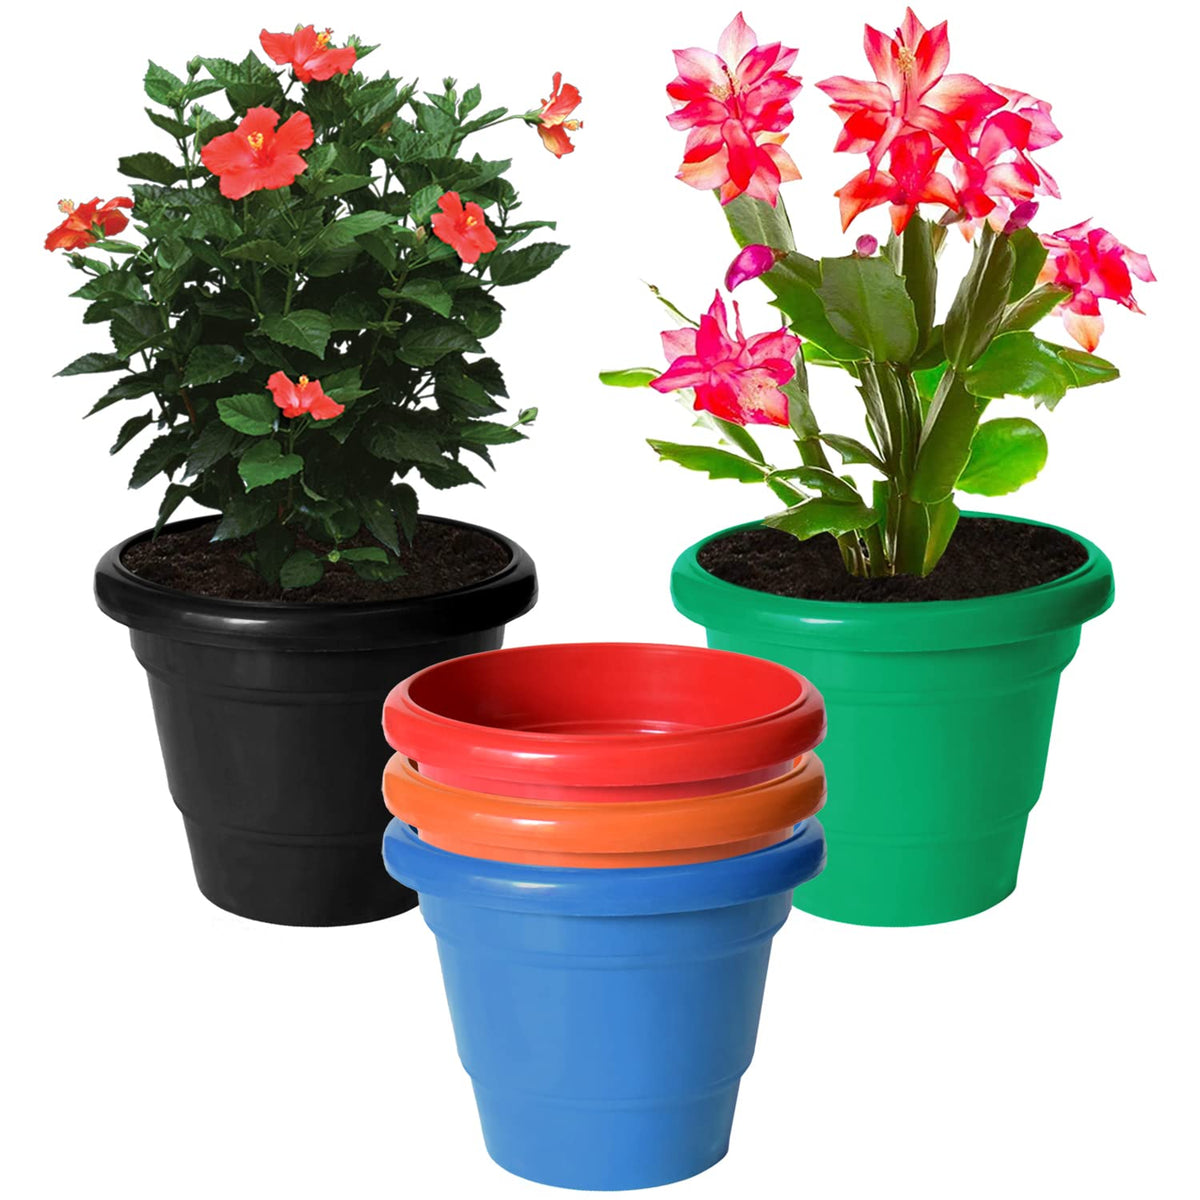 Kuber Industries Solid 2 Layered Plastic Flower Pot|Gamla|Flower Pots for Garden Nursery,Home Décor,8"x 6",Pack of 5 (Multicolor)